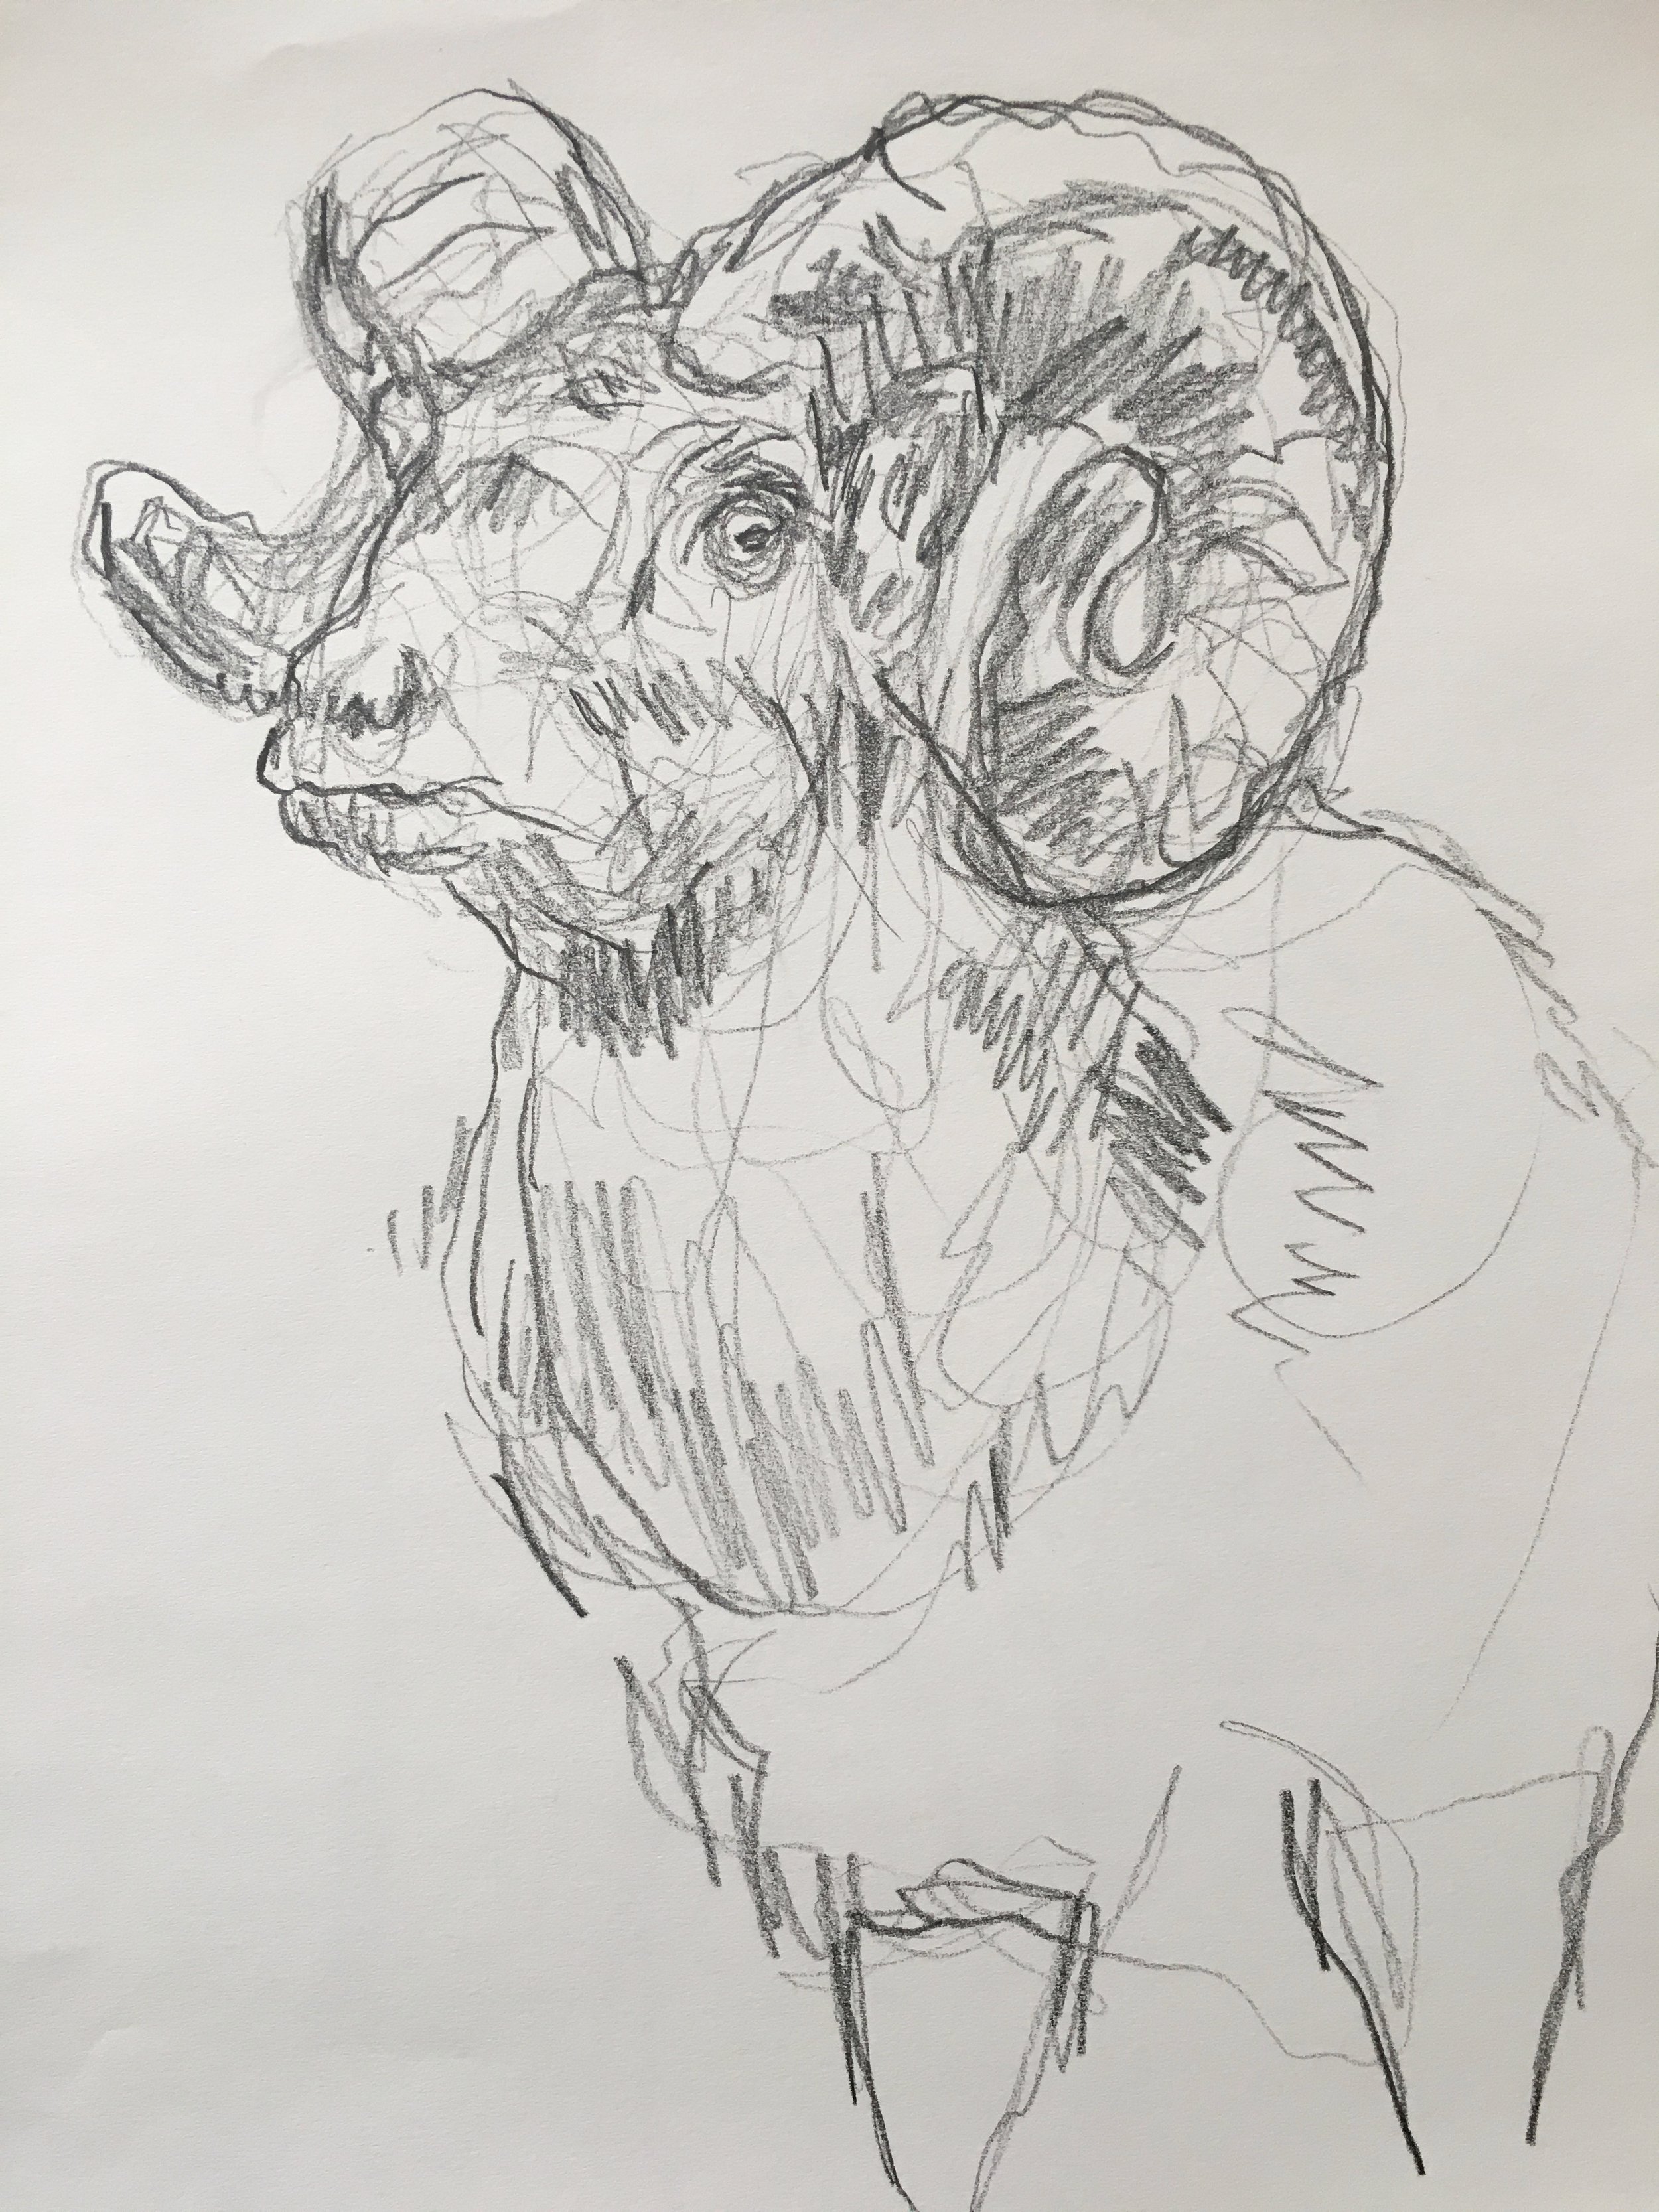 Ram / Yale Peabody Museum, New Haven CT